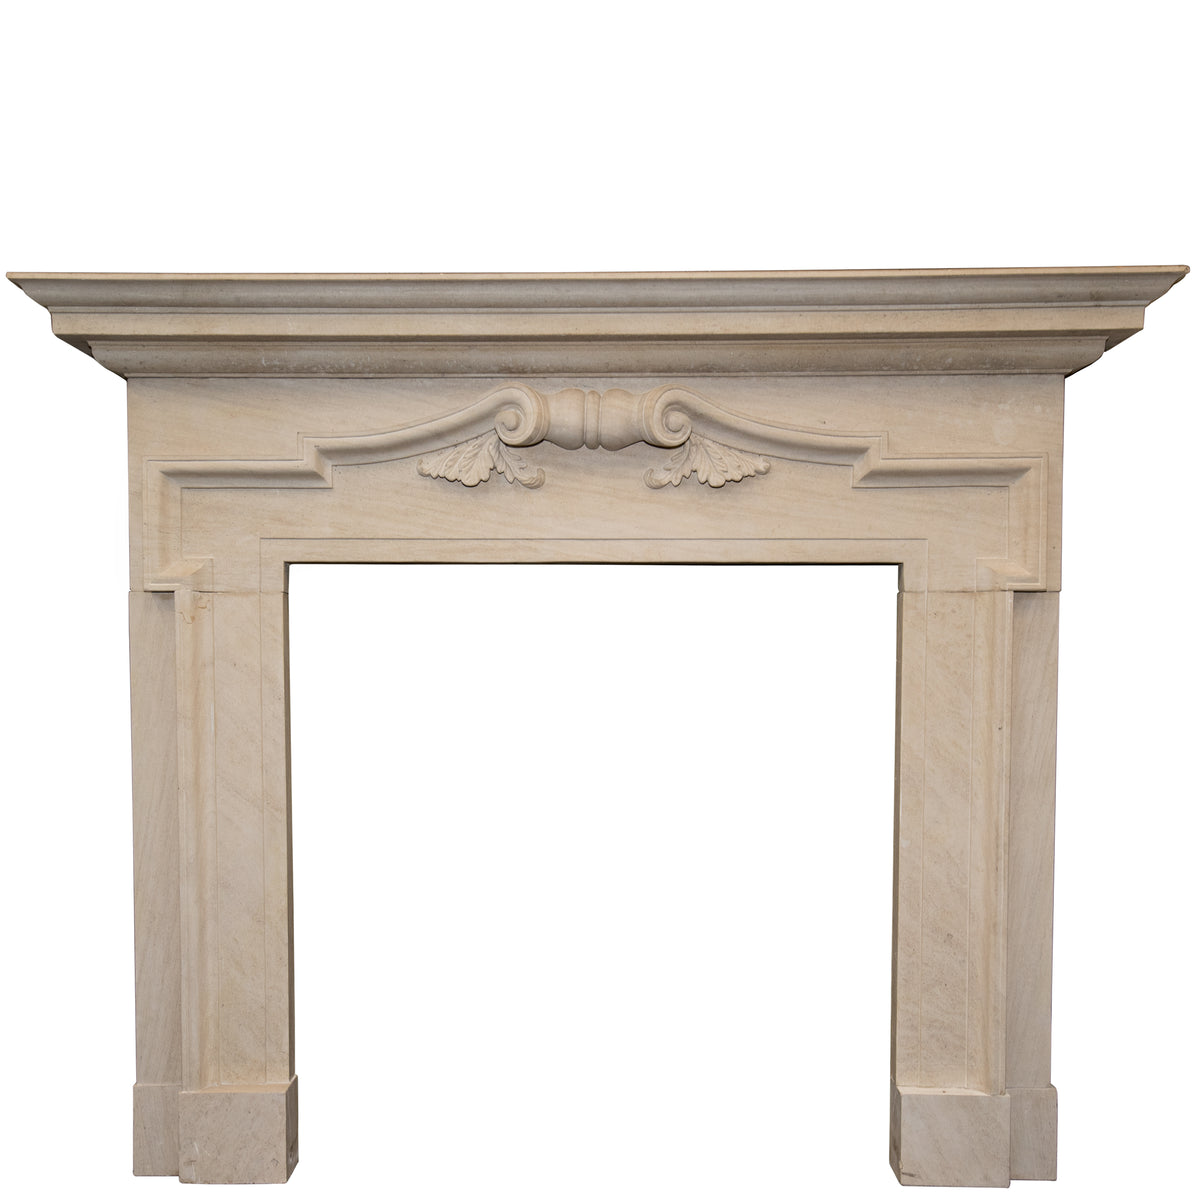 Reclaimed Baroque Style Limestone Fireplace Surround | The Architectural Forum